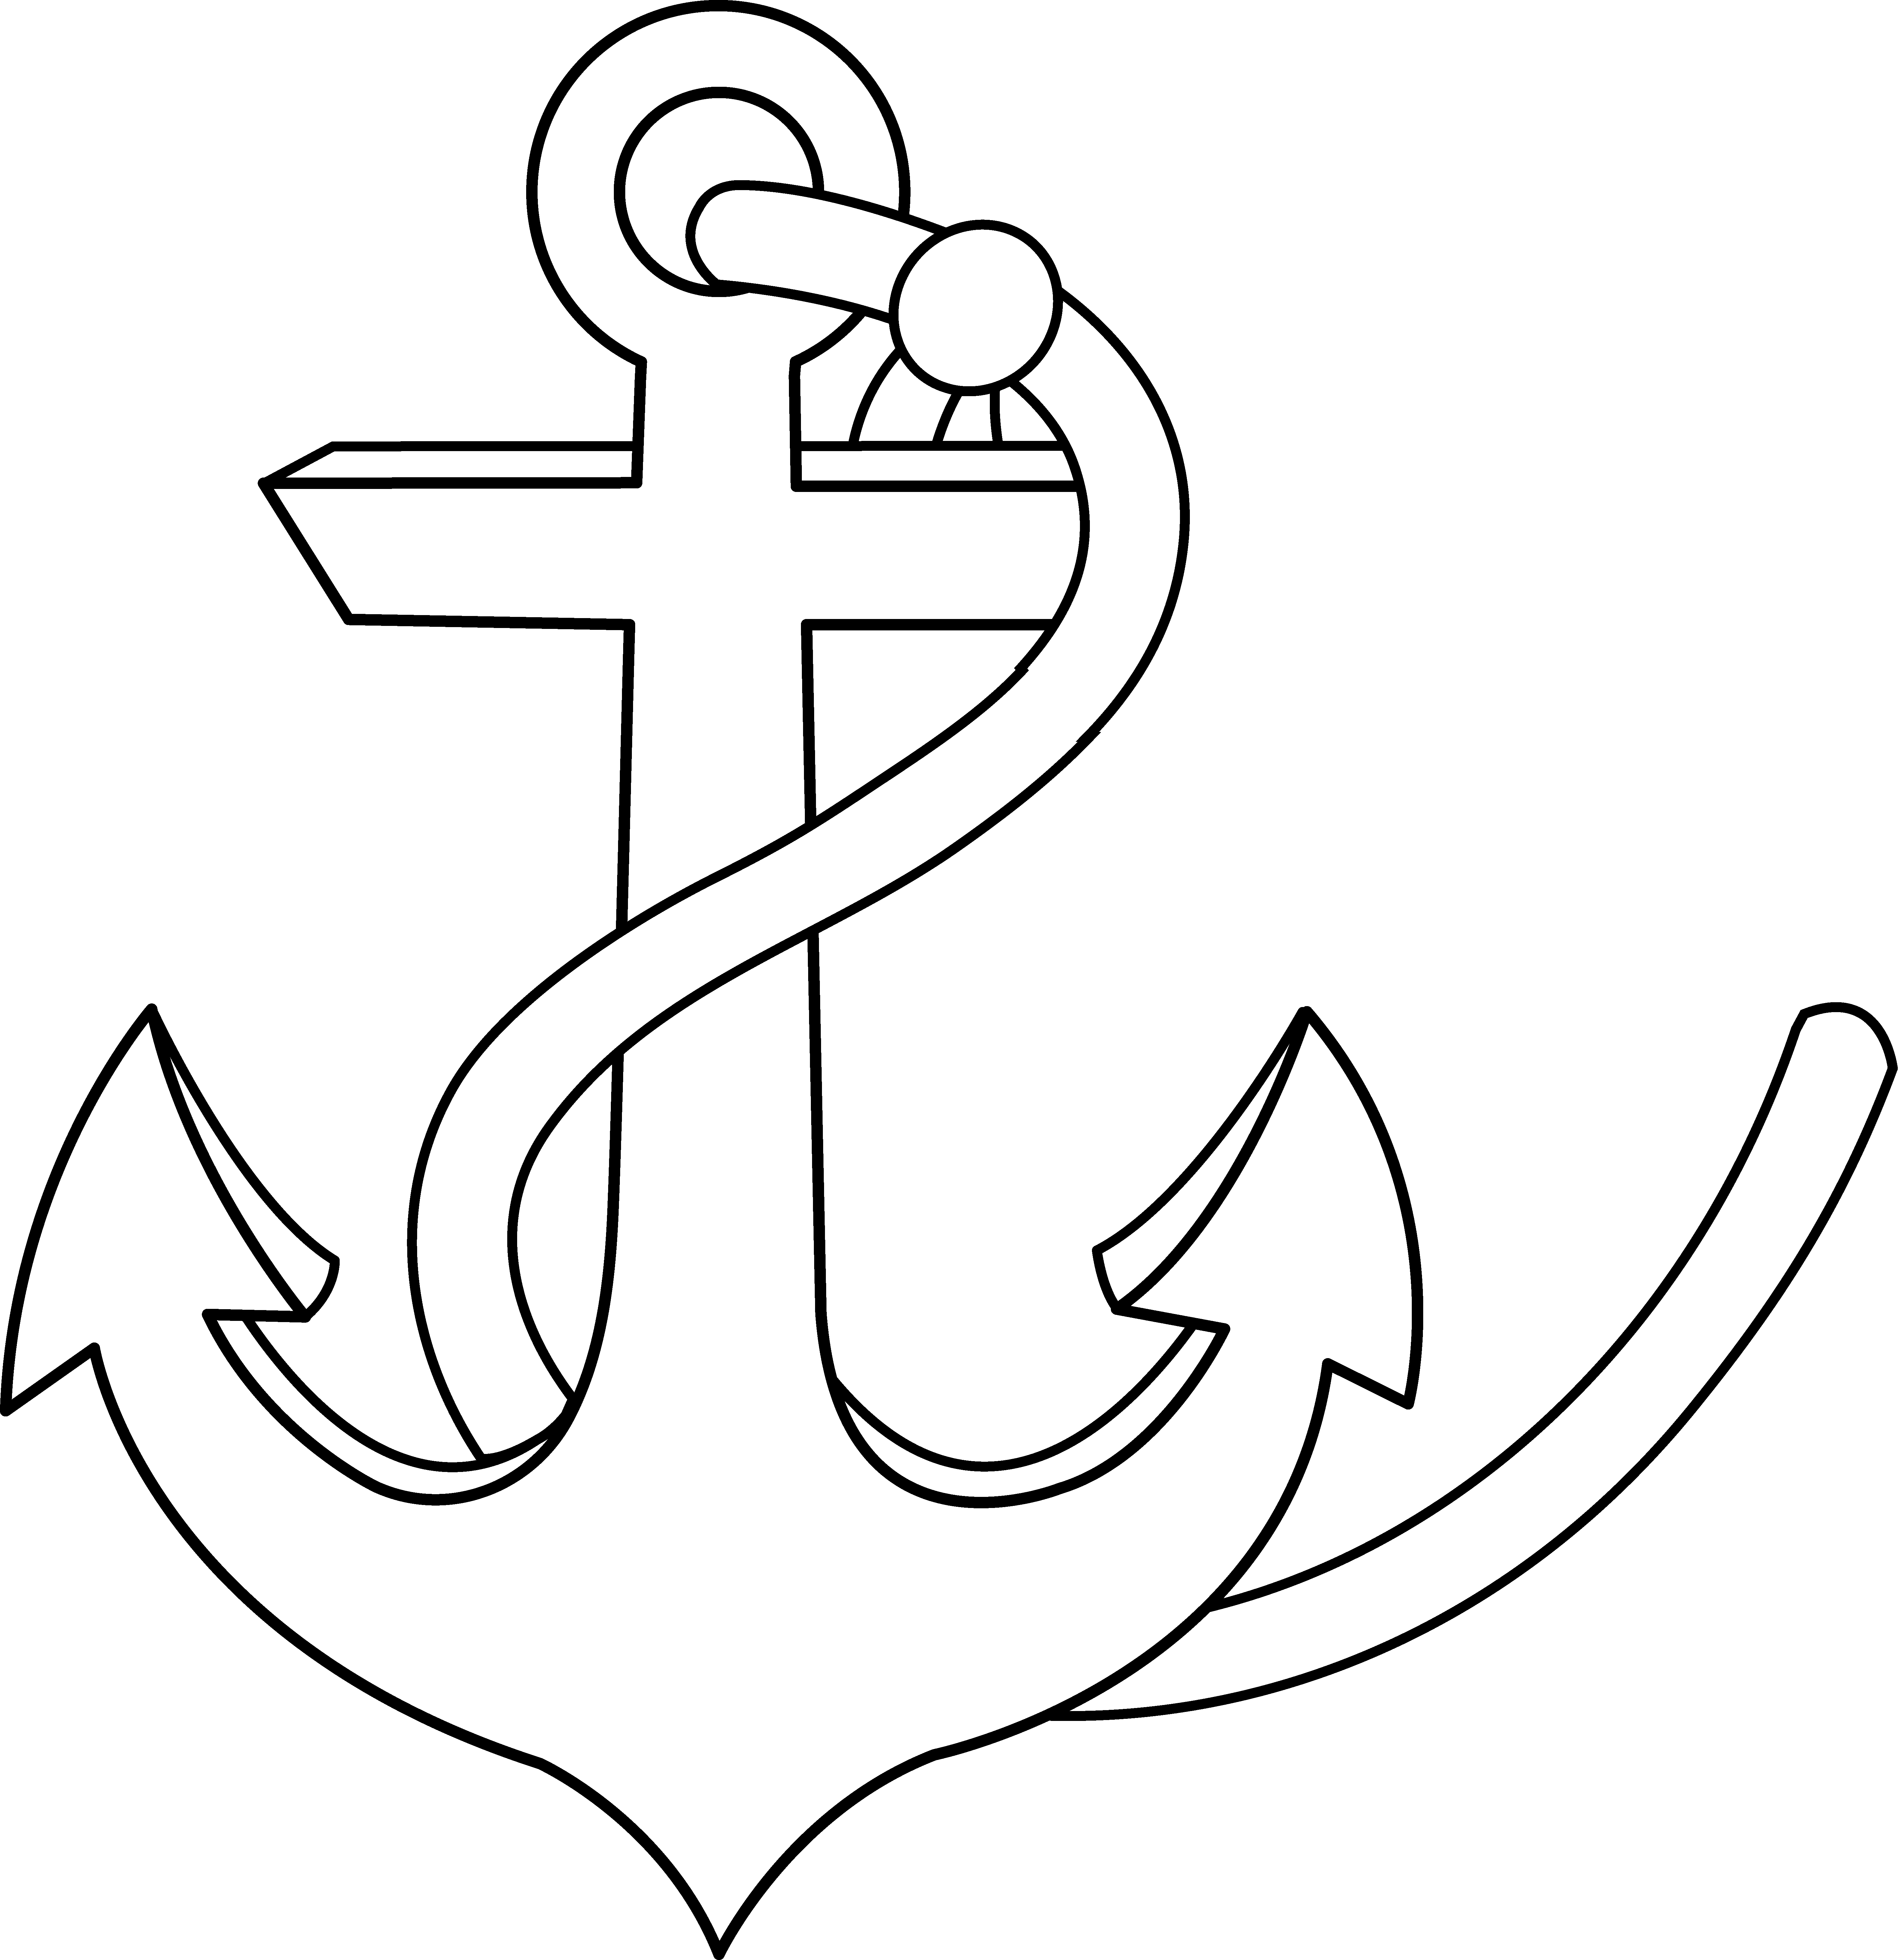 Free Anchor Images, Download Free Anchor Images png images, Free ...